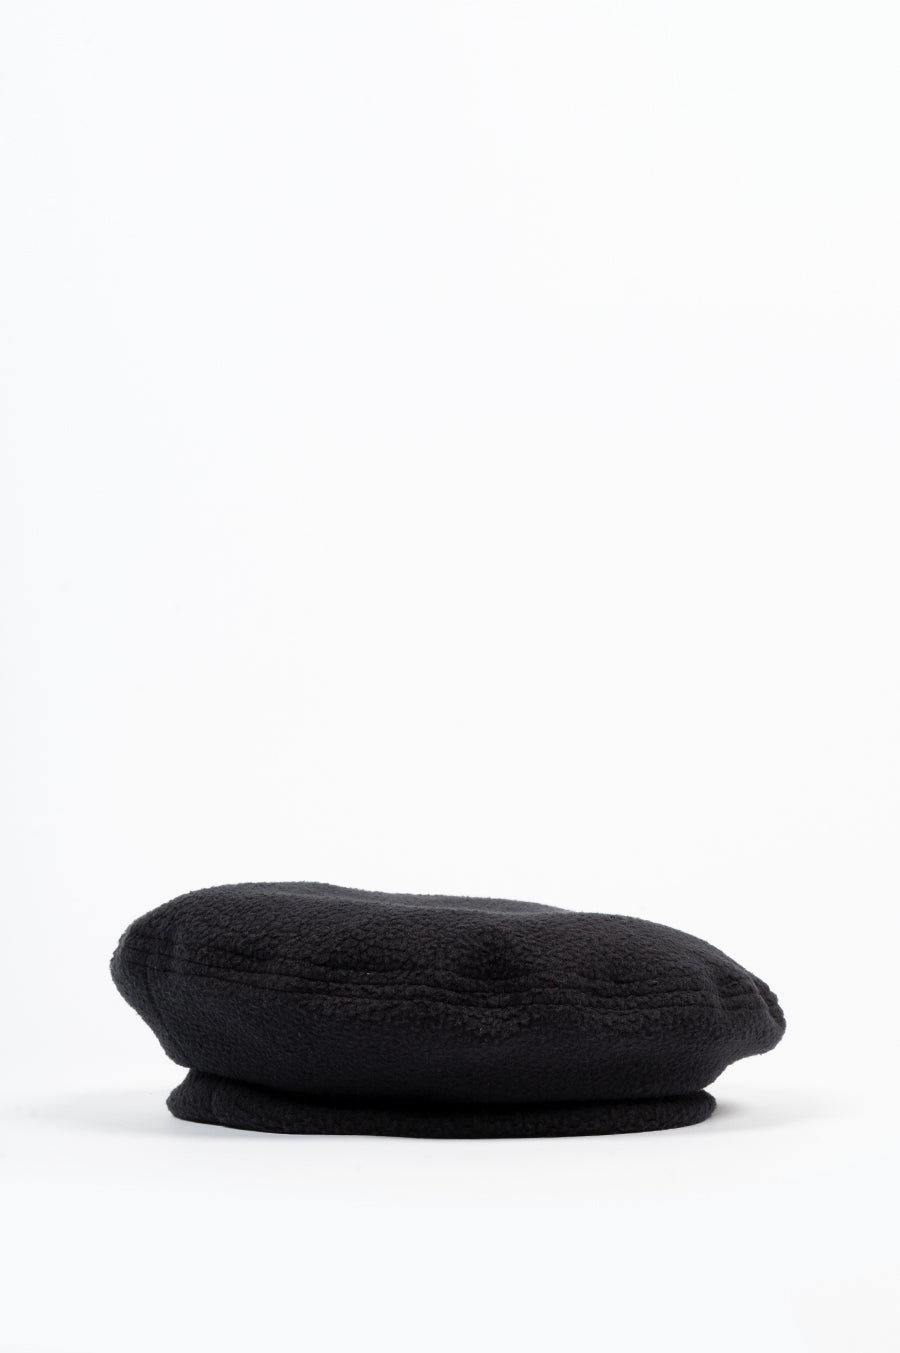 HOUSE OF PAA BERET BLACK